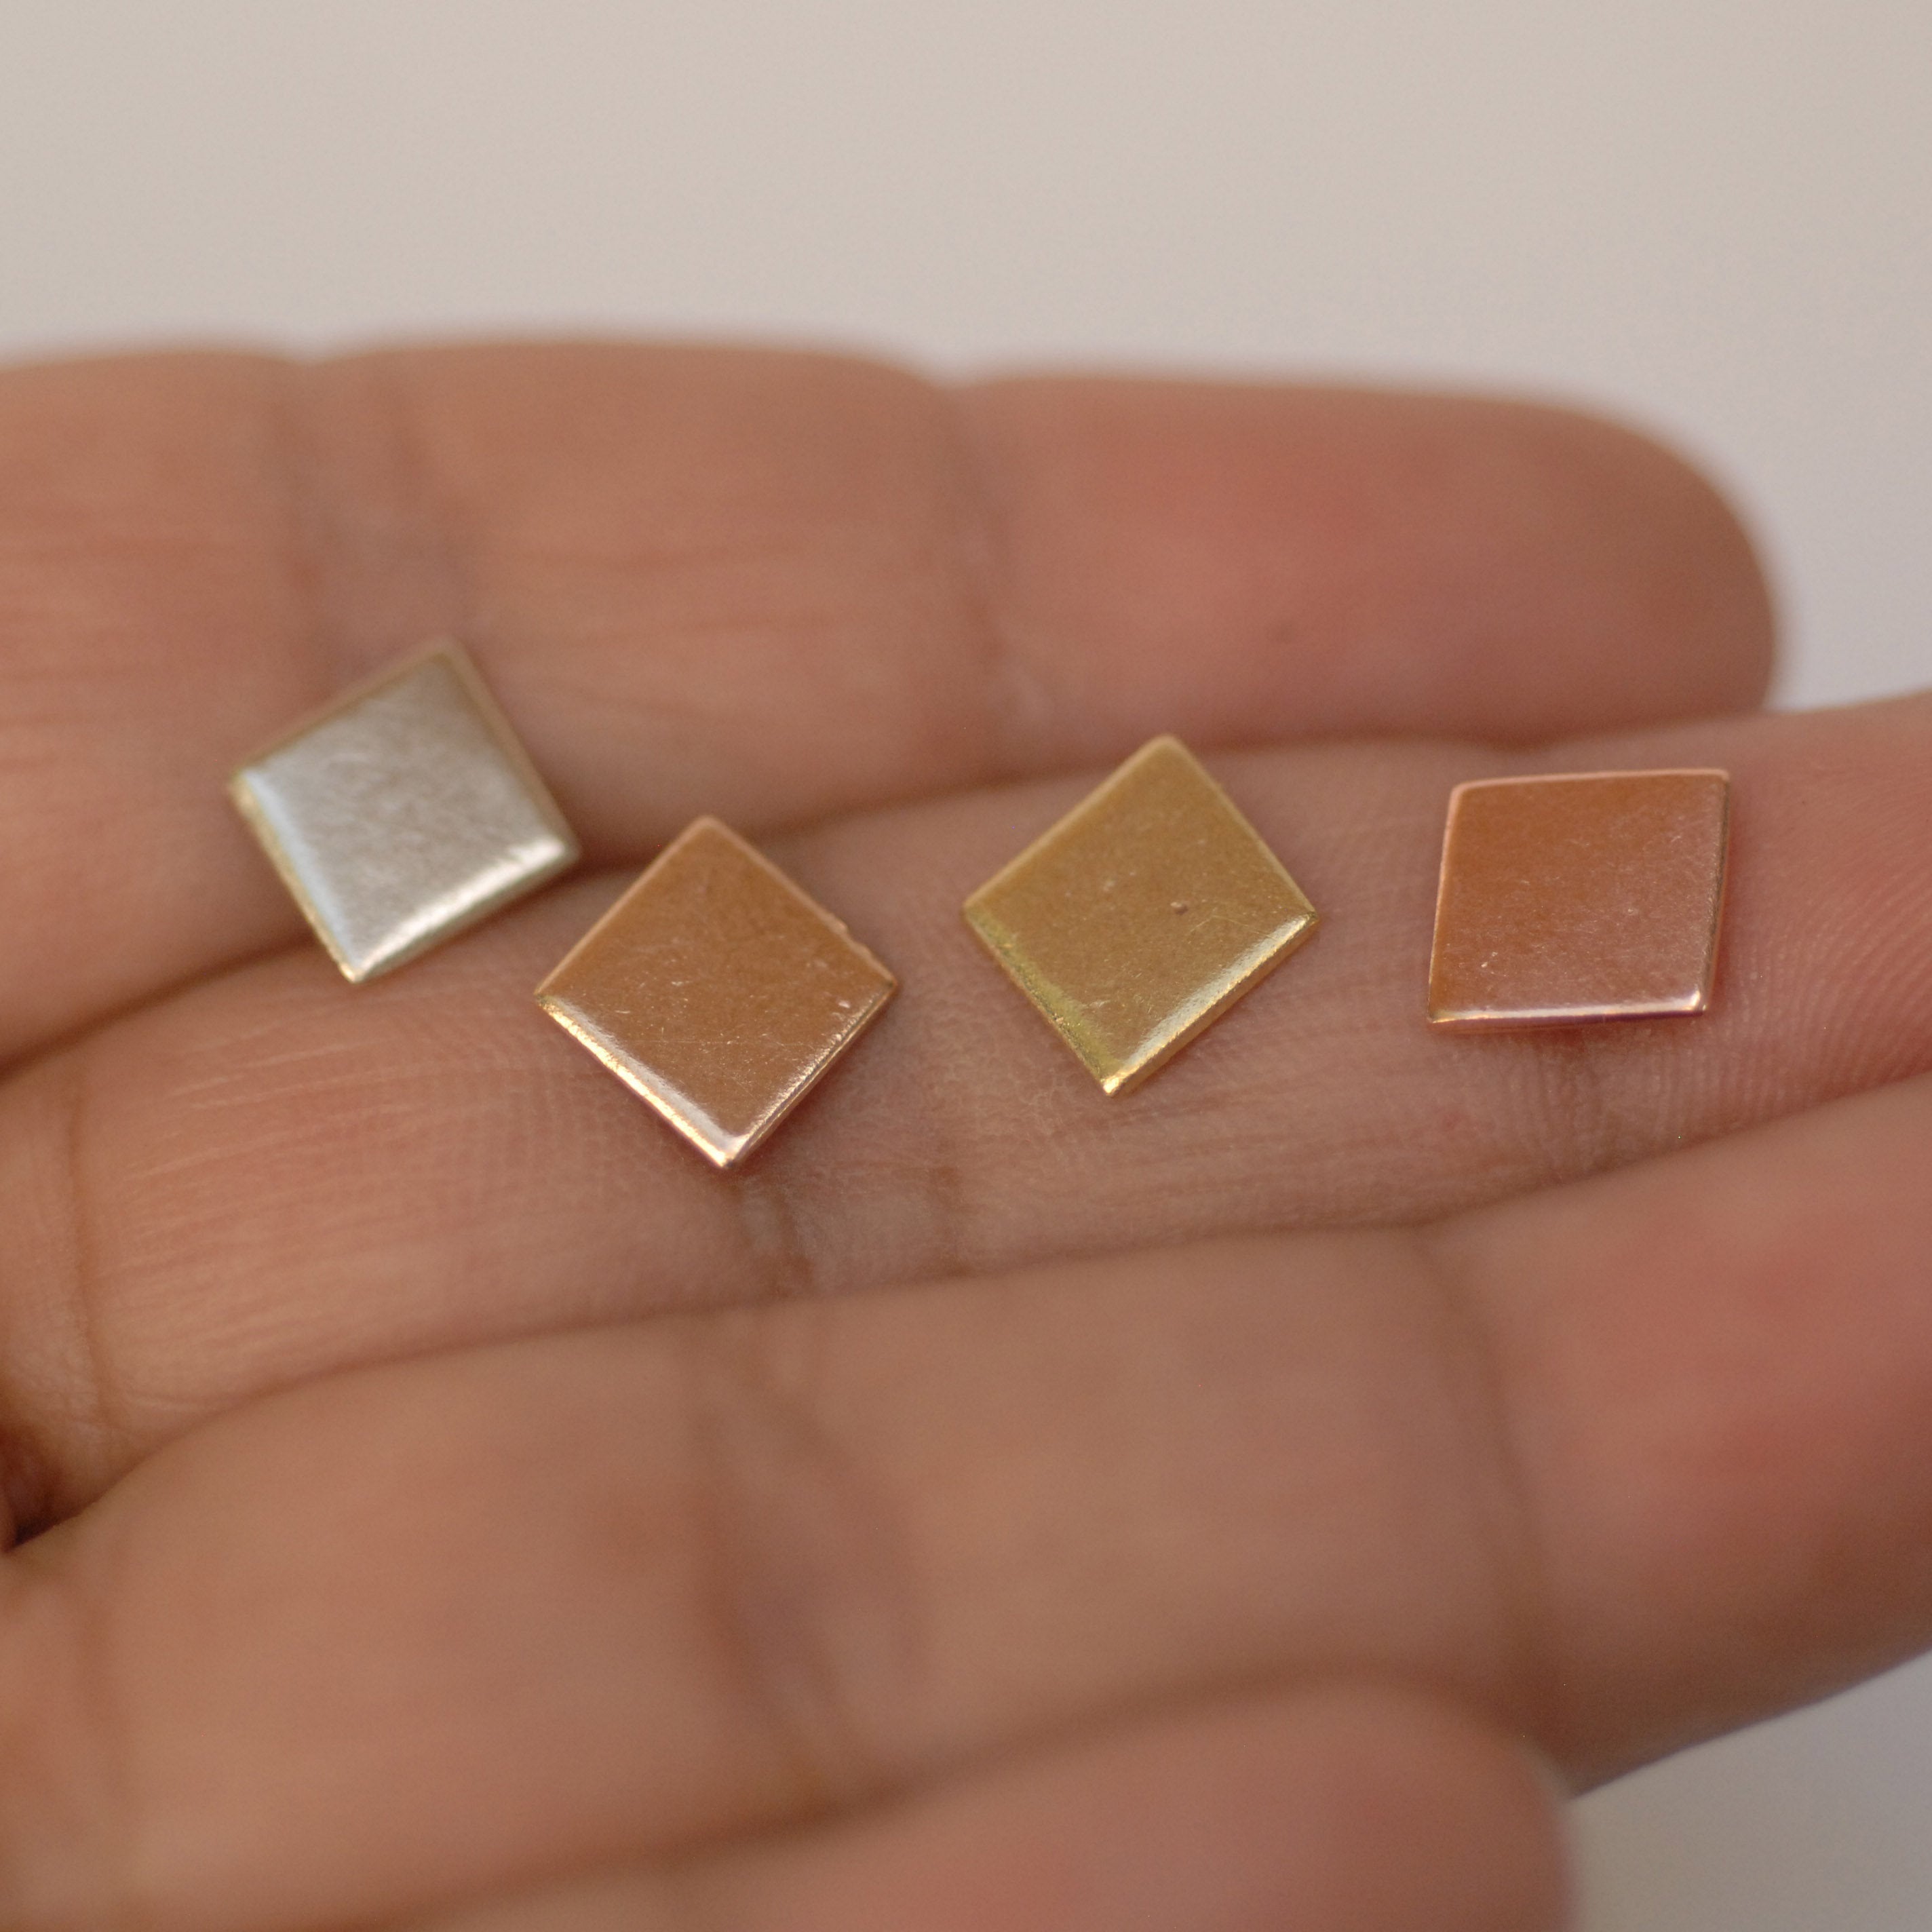 Tiny Diamond shapes 9mm x 10.5mm metal blanks for making jewelry copper, brass, bronze, nickel silver